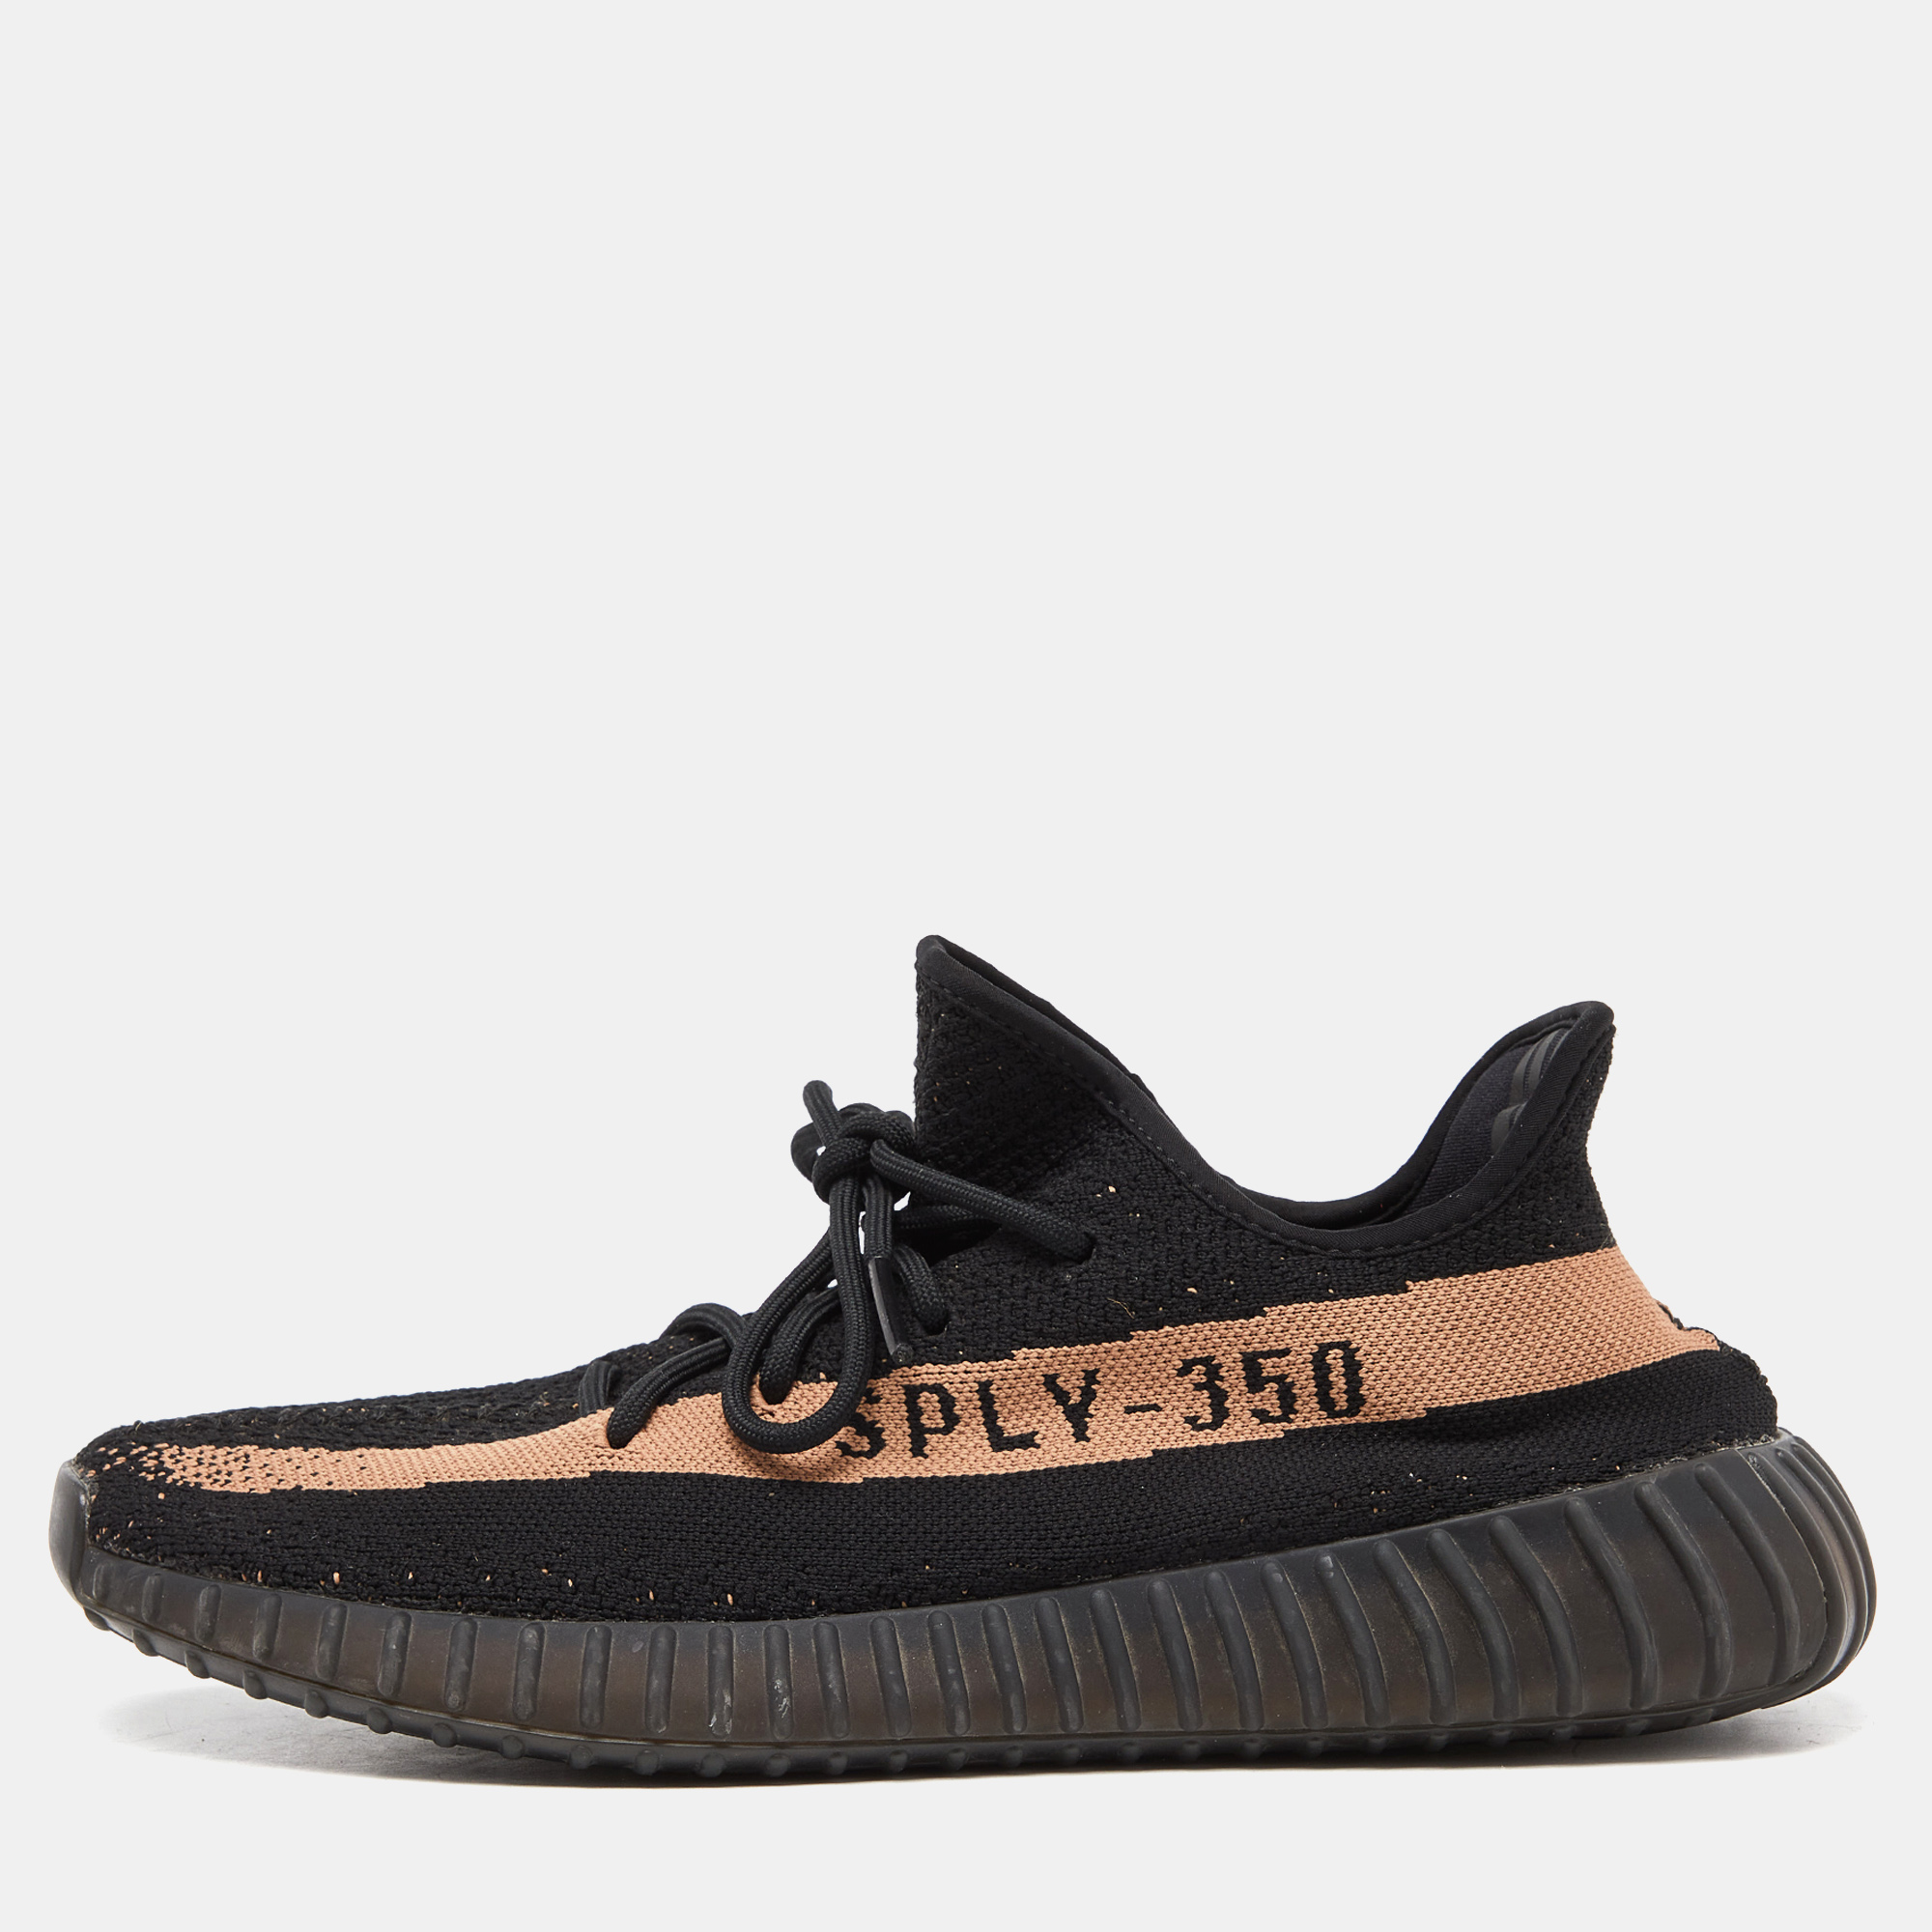 Pre-owned Yeezy X Adidas Black Knit Fabric Boost-350-v2-core-black Copper Sneakers Size 44 1/3